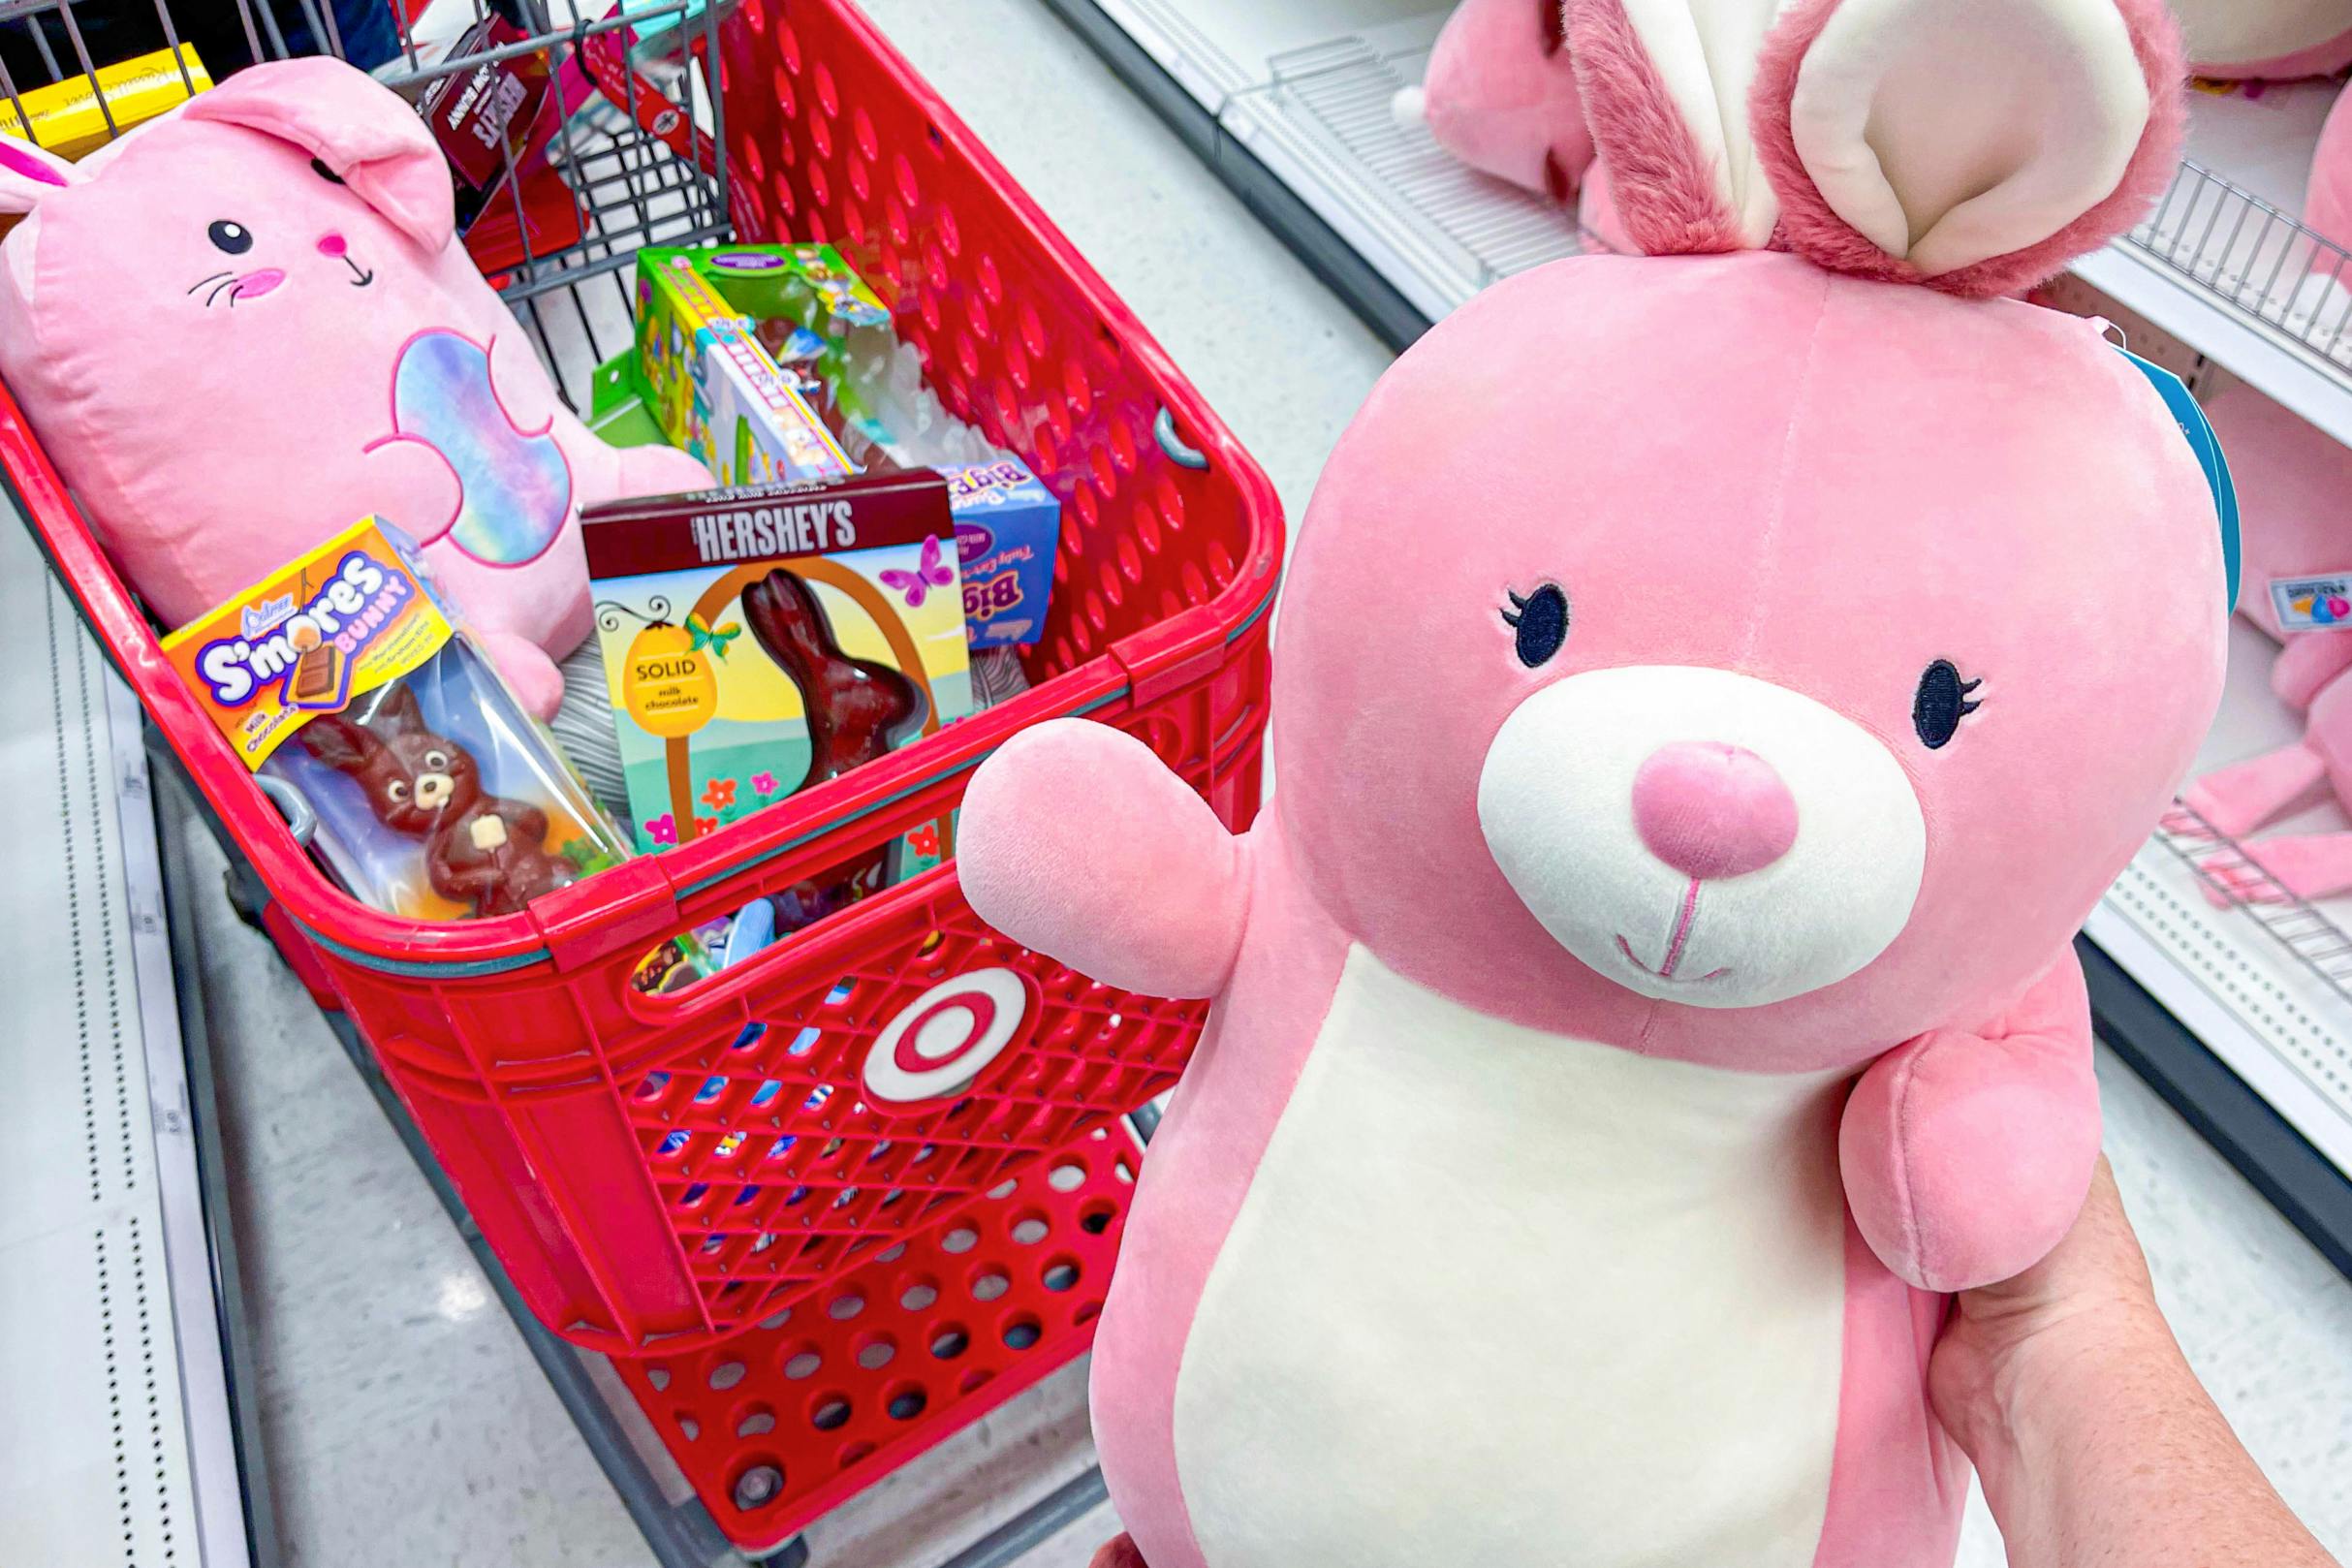 Target Easter Clearance: How To Shop Target's After-Holiday